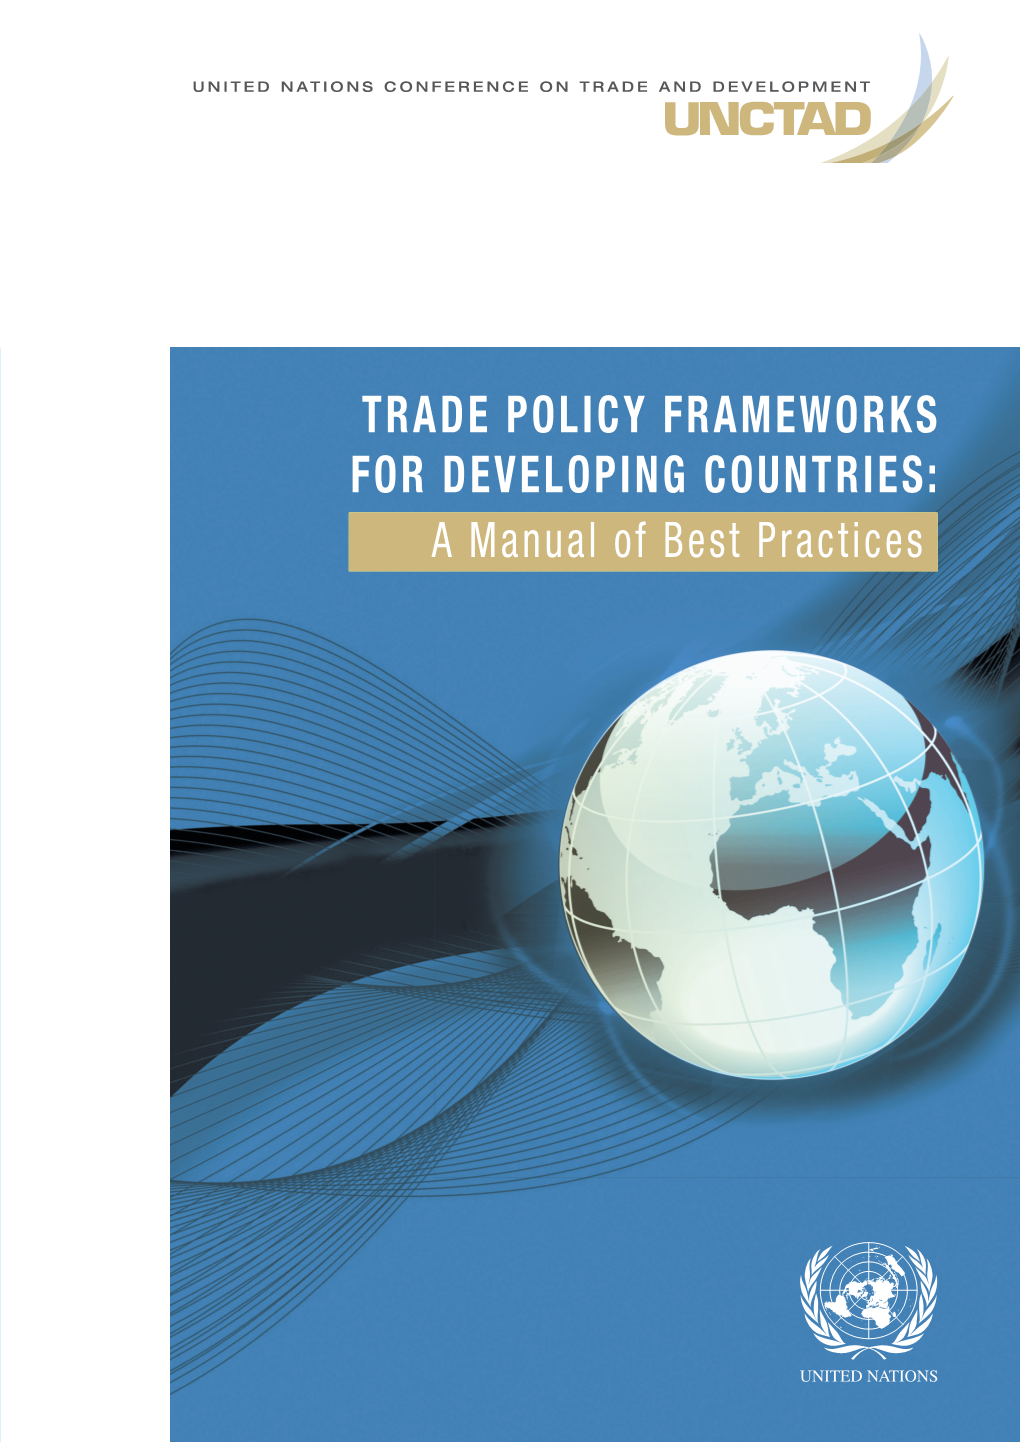 TRADE POLICY FRAMEWORKS for DEVELOPING COUNTRIES: a Manual of Best Practices